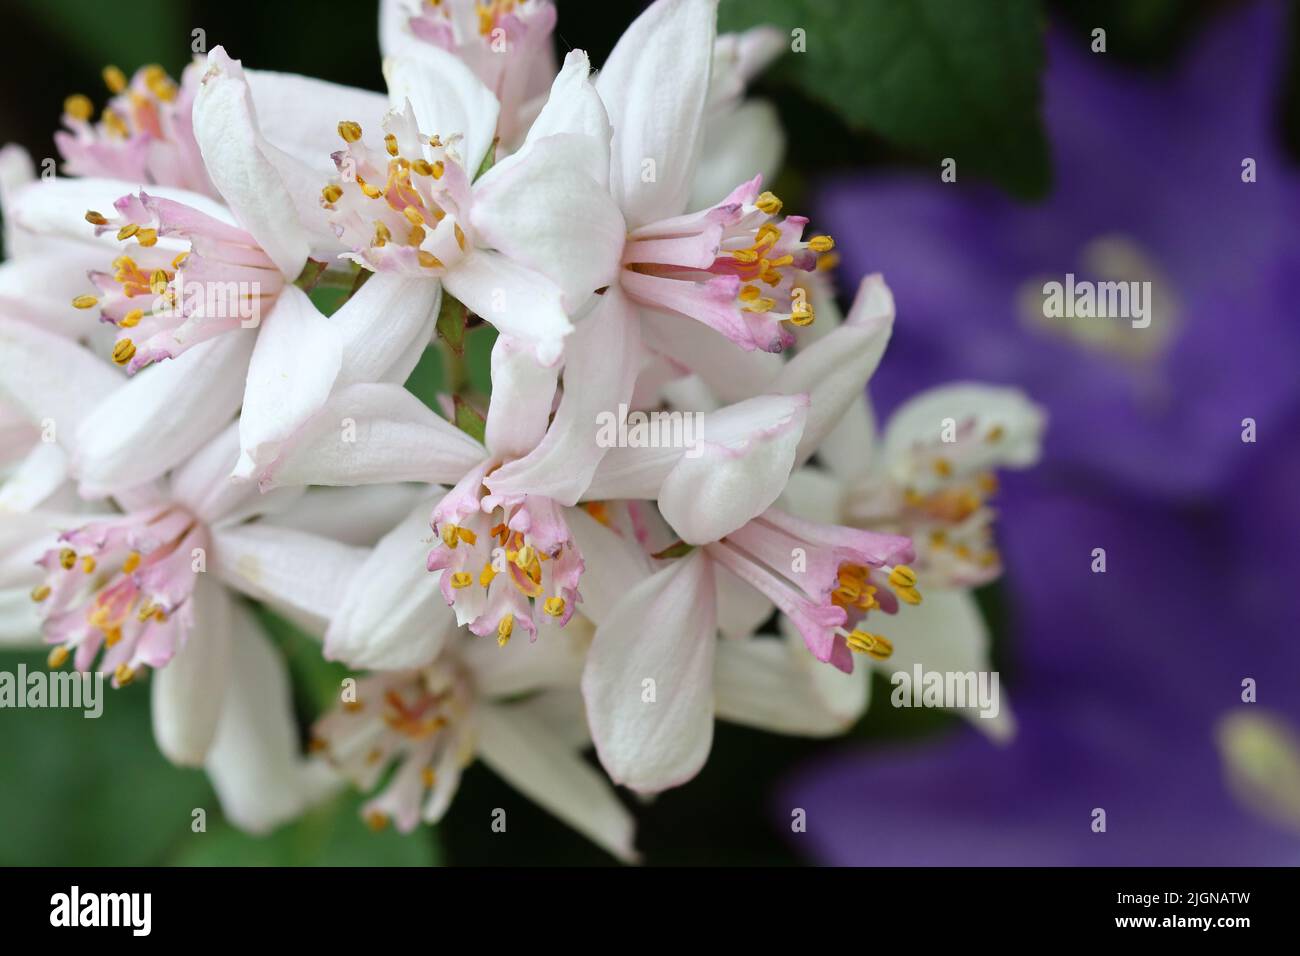 side close-up of the beautiful white pink flowers of a Deutzia 'Mont Rose' with its pretty yellow stamens against a green and blue blurred background Stock Photo